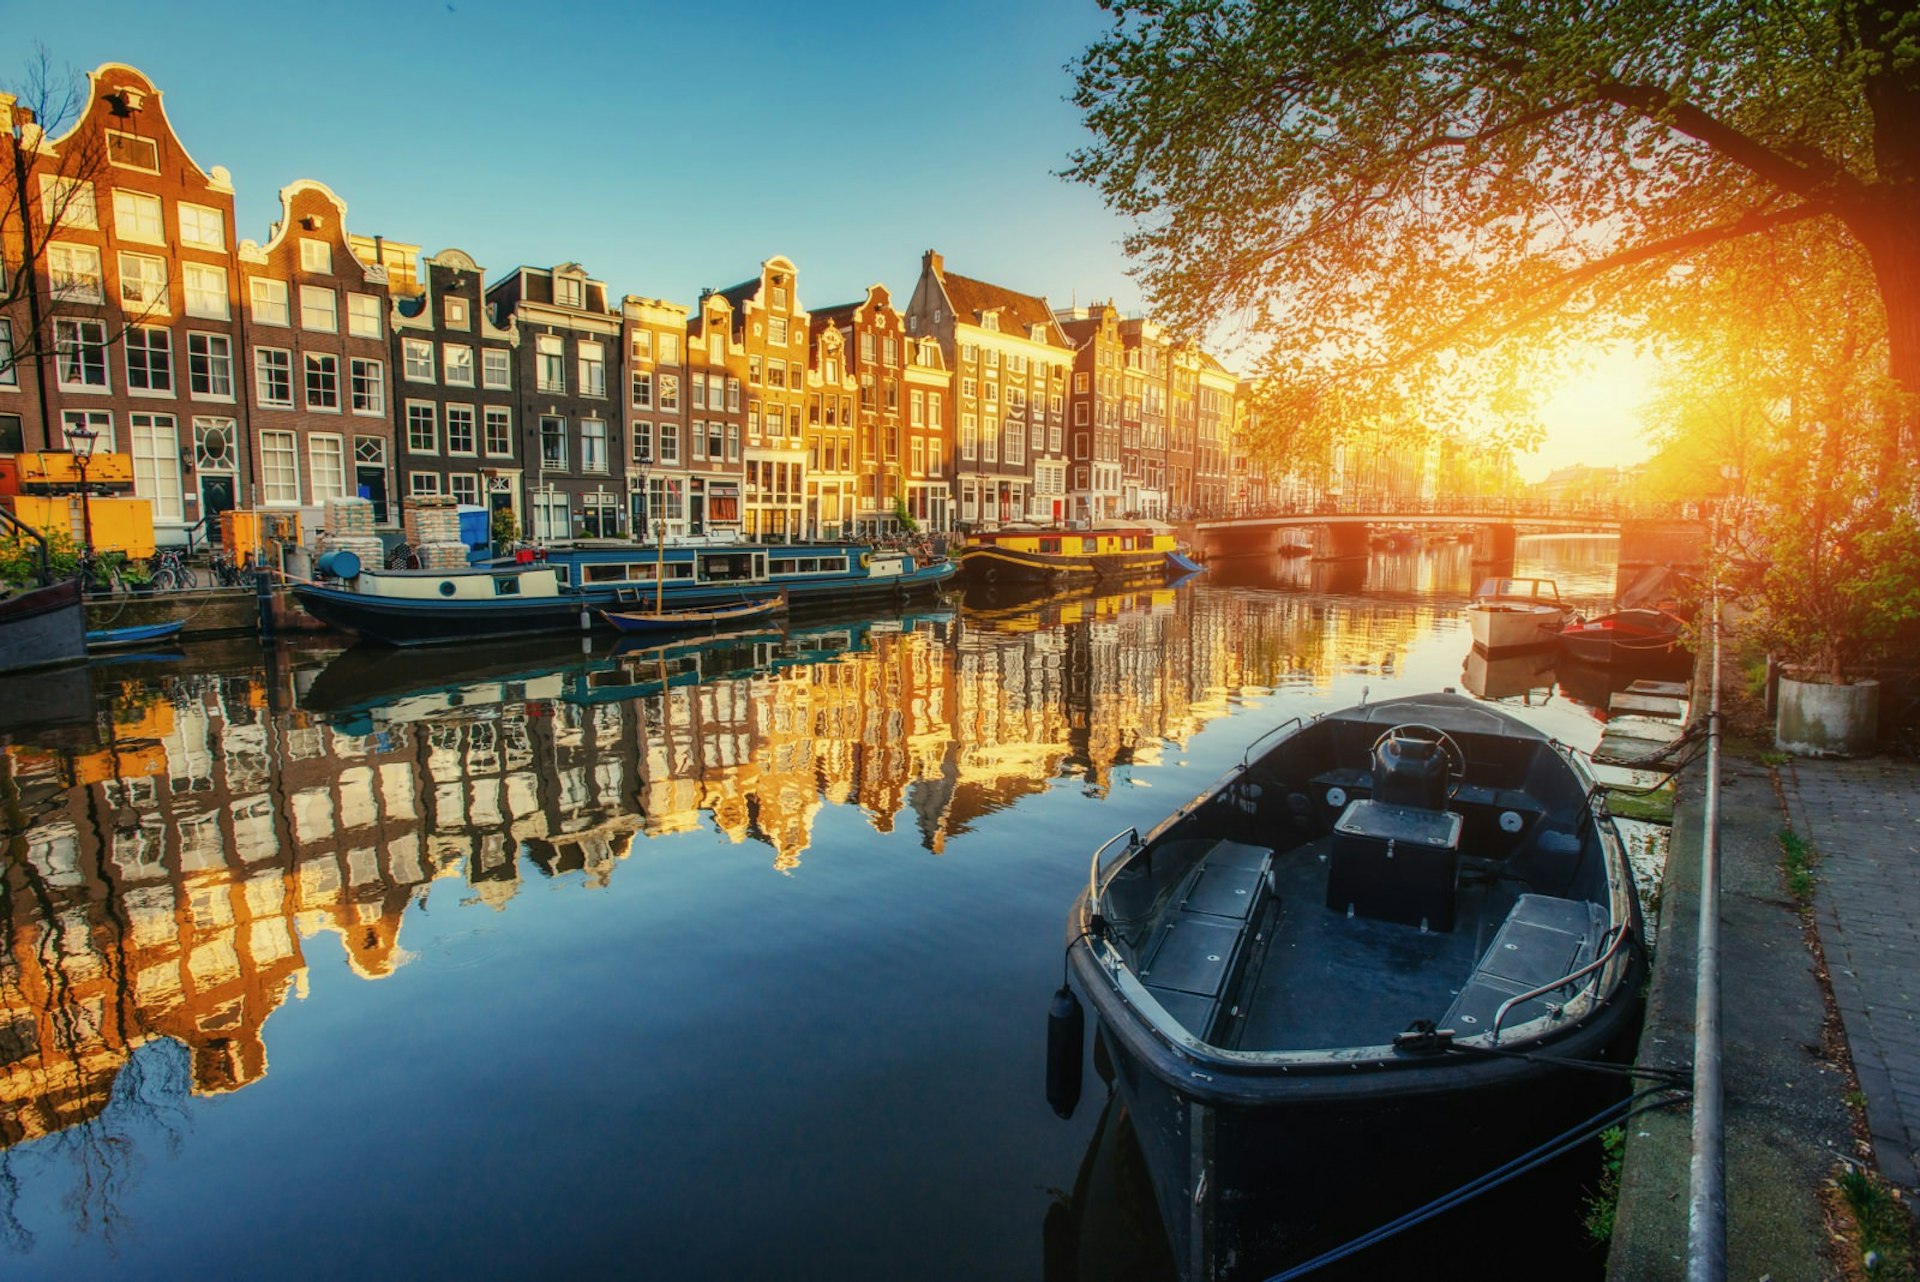 The sun rises over Amsterdam's famed canals with old buildings in the background and an empty boat in the foreground 